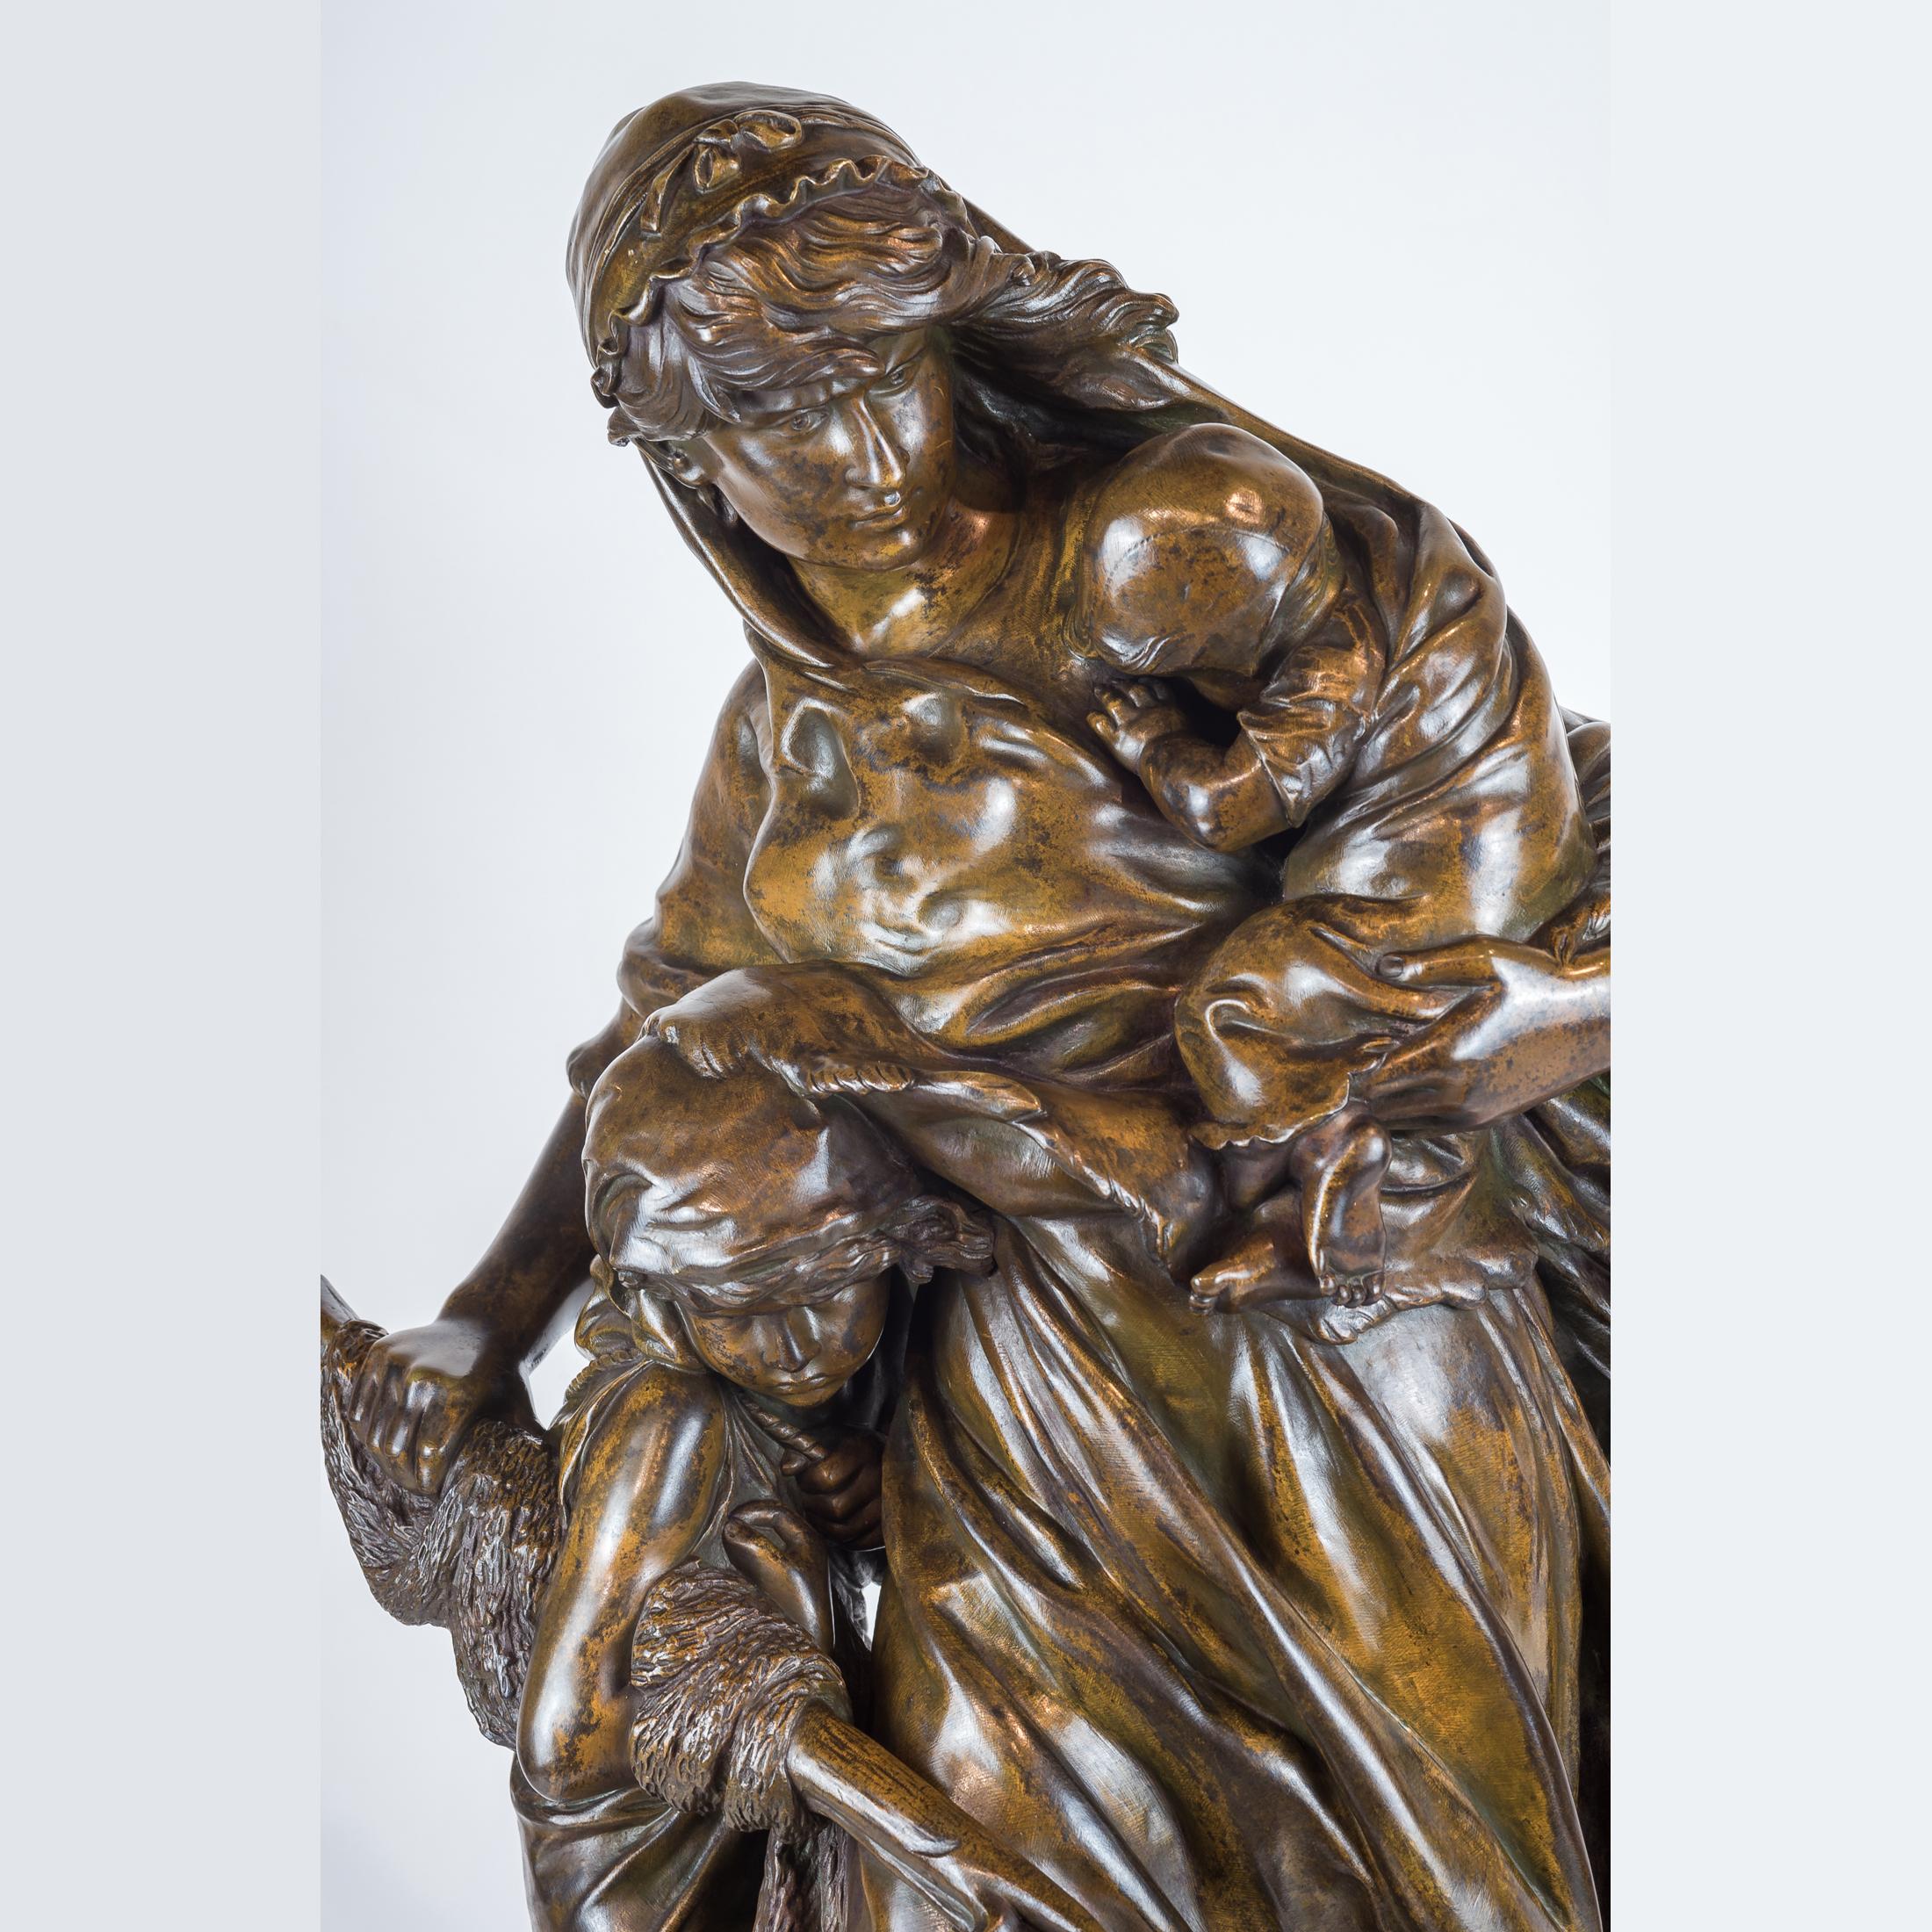 Bronze Sculpture of a Mother and Child - Gold Figurative Sculpture by Mathurin Moreau